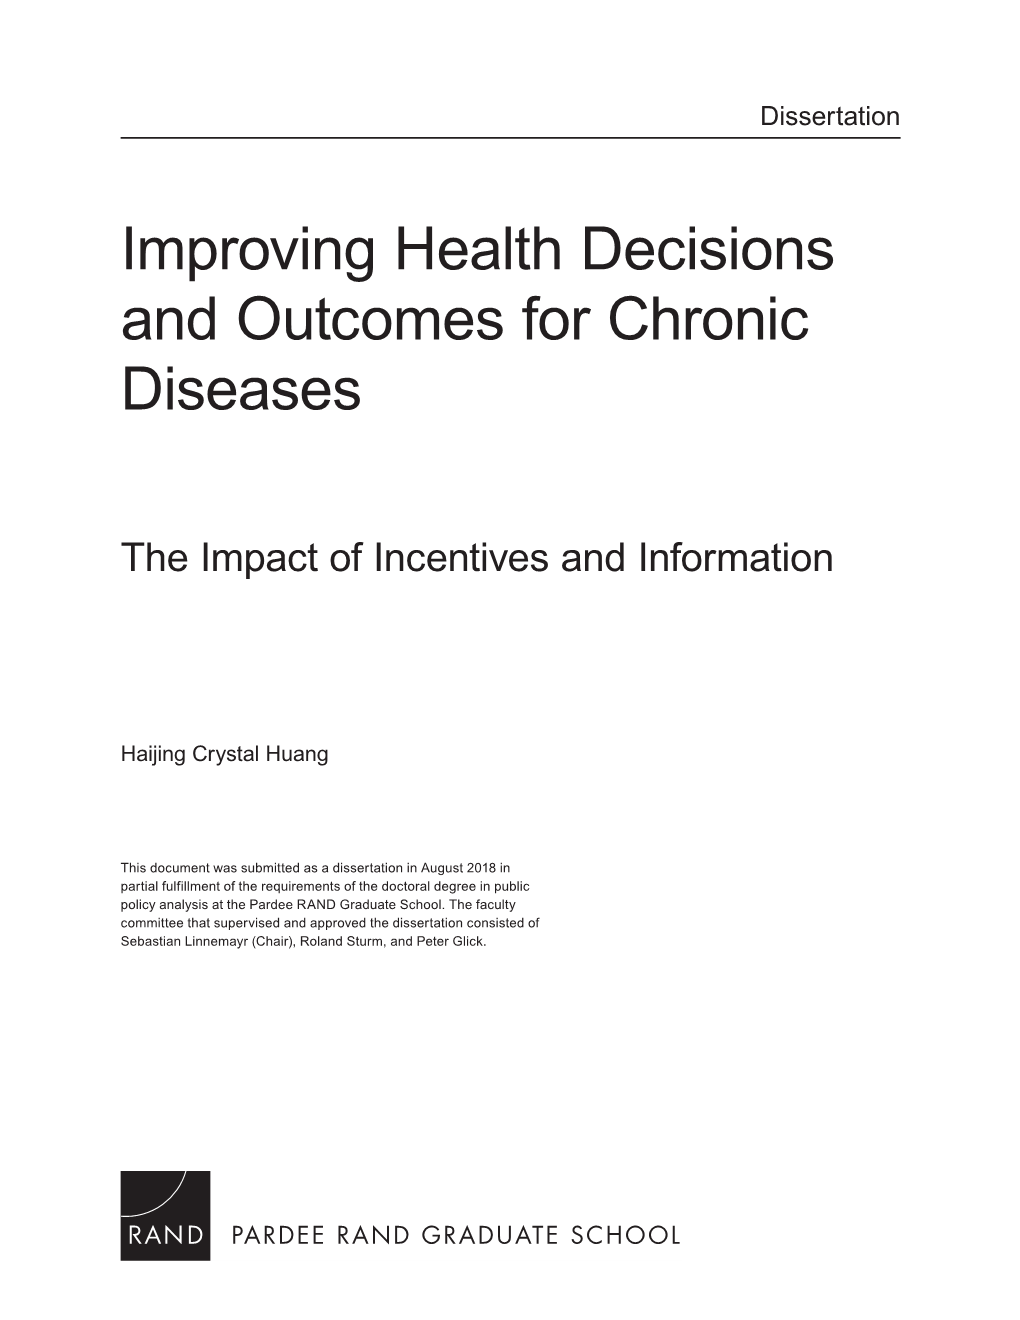 Improving Health Decisions and Outcomes for Chronic Diseases: the Impact of Incentives and Information